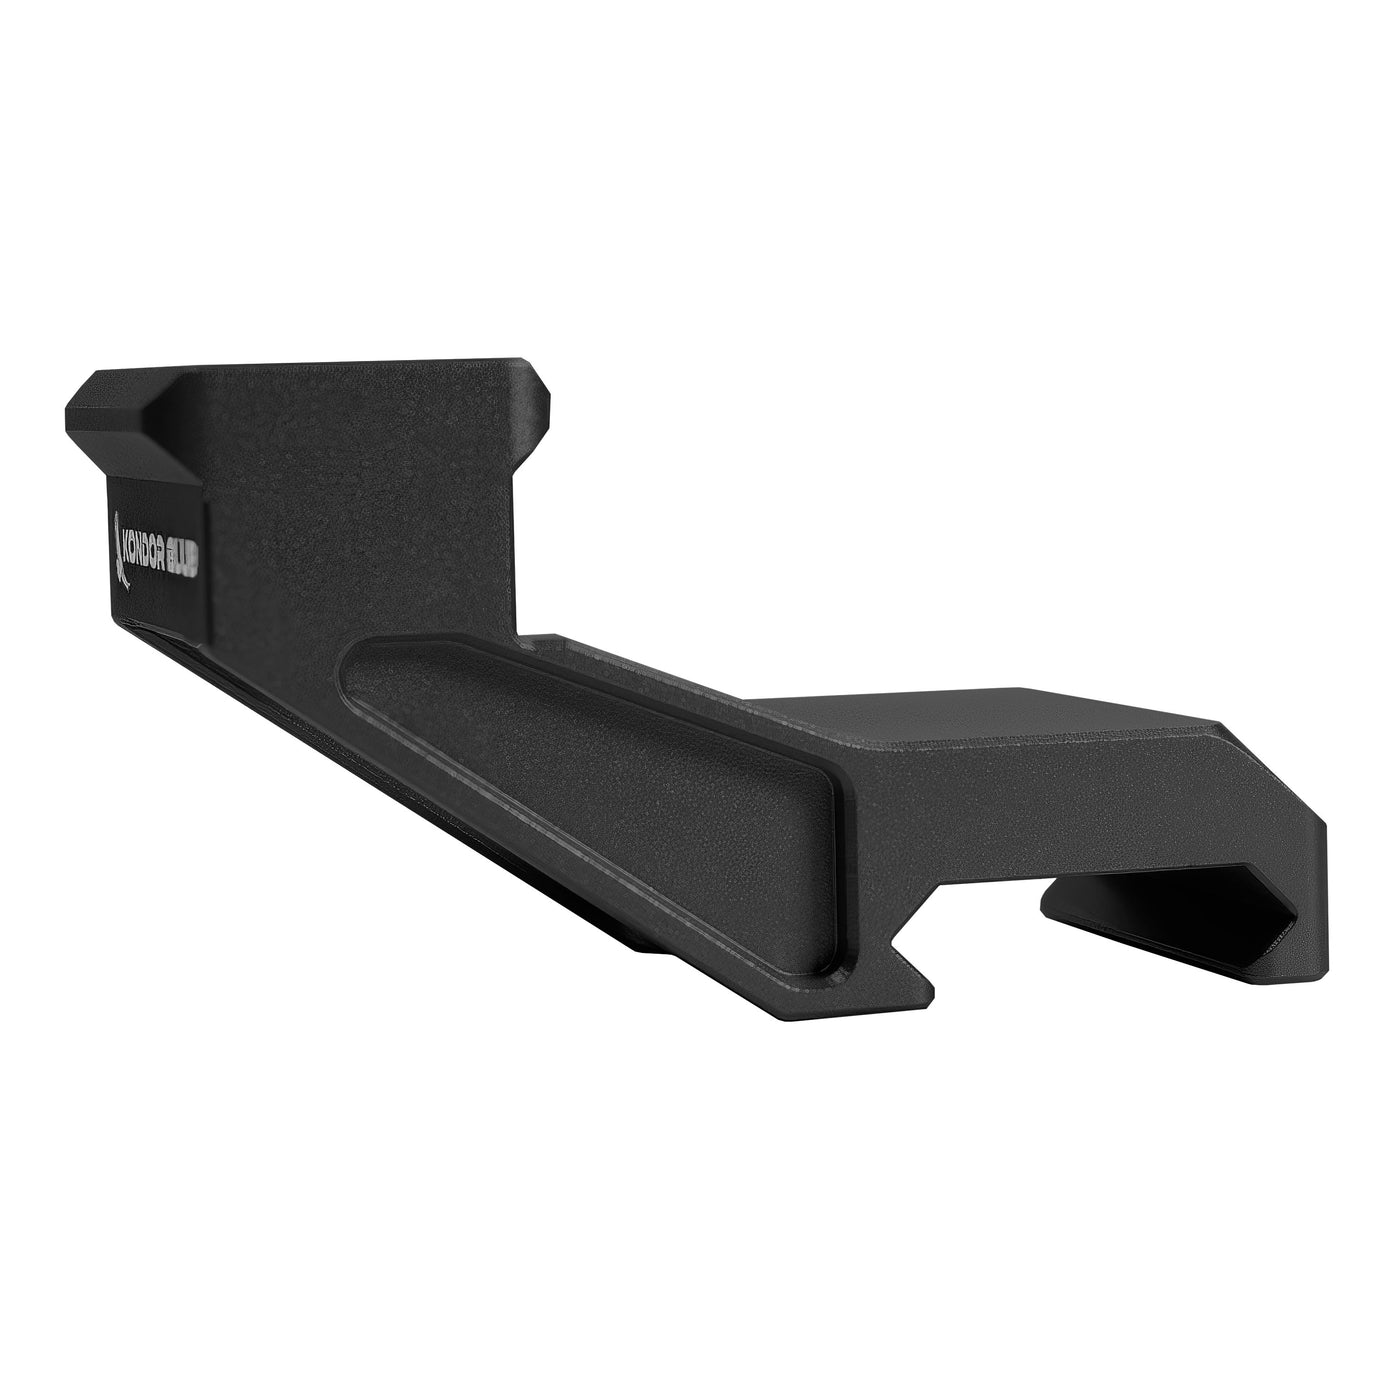 NATO Riser Height Extension for Top Handles (S1H/Sony/R5C)